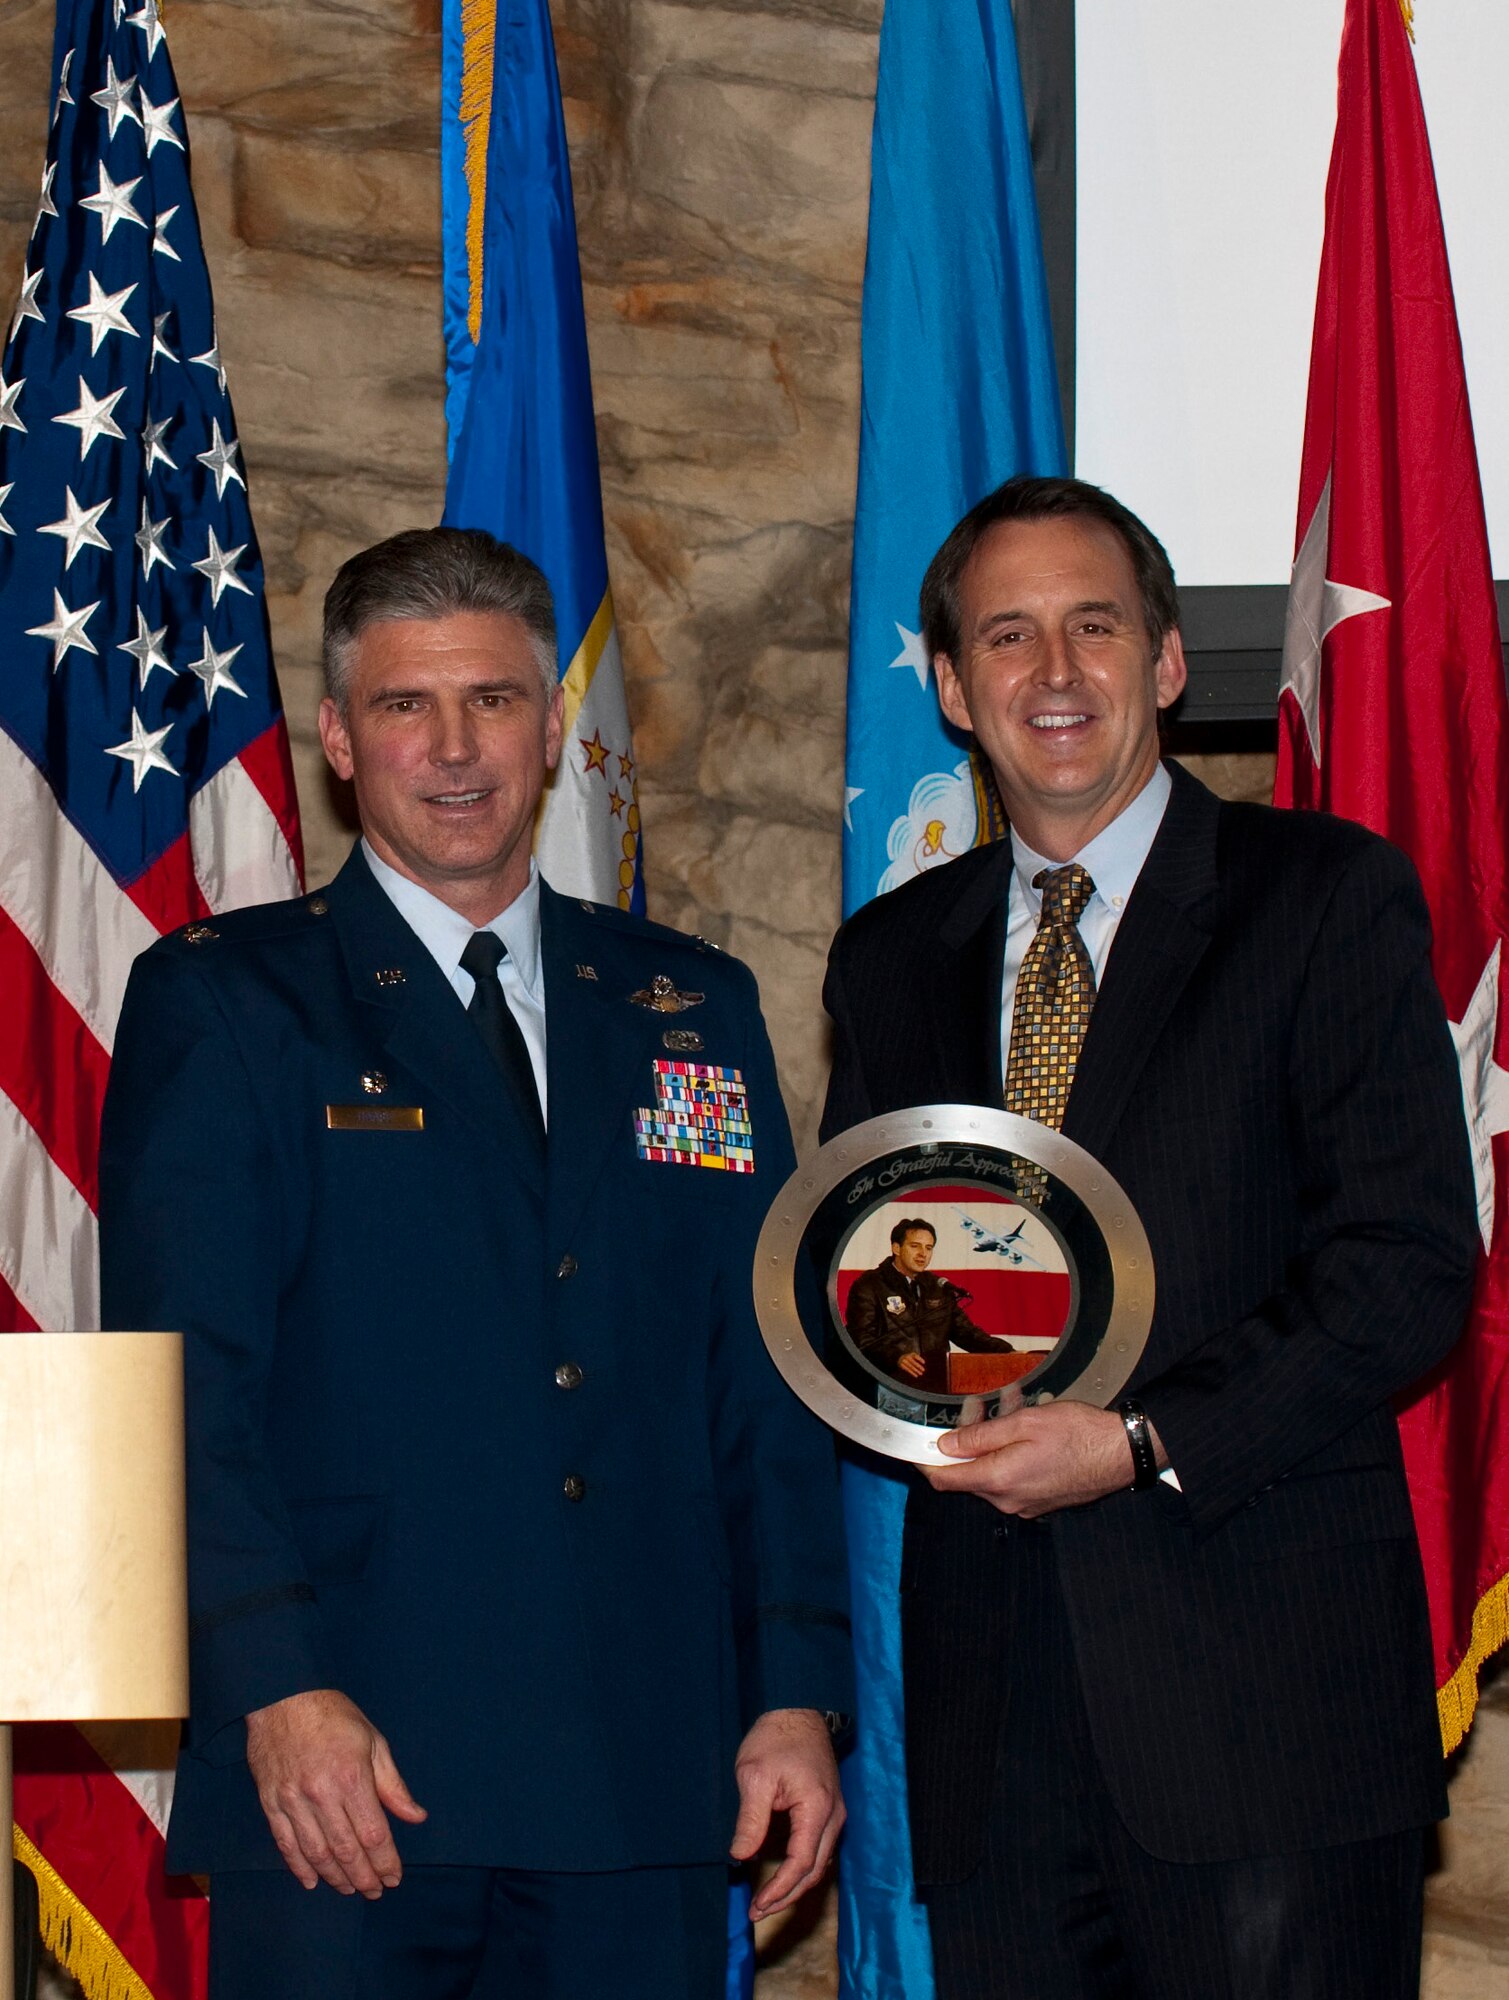 Governor of Minnesota Tim Pawlenty receives a gift from 133rd Airlift Wing commander Col. Greg Haase during the 133rd Airlift Wing Recognition Ceremony Dec. 11, 2010 in St. Paul, Minn. USAF photo by Tech. Sgt. Erik Gudmundson